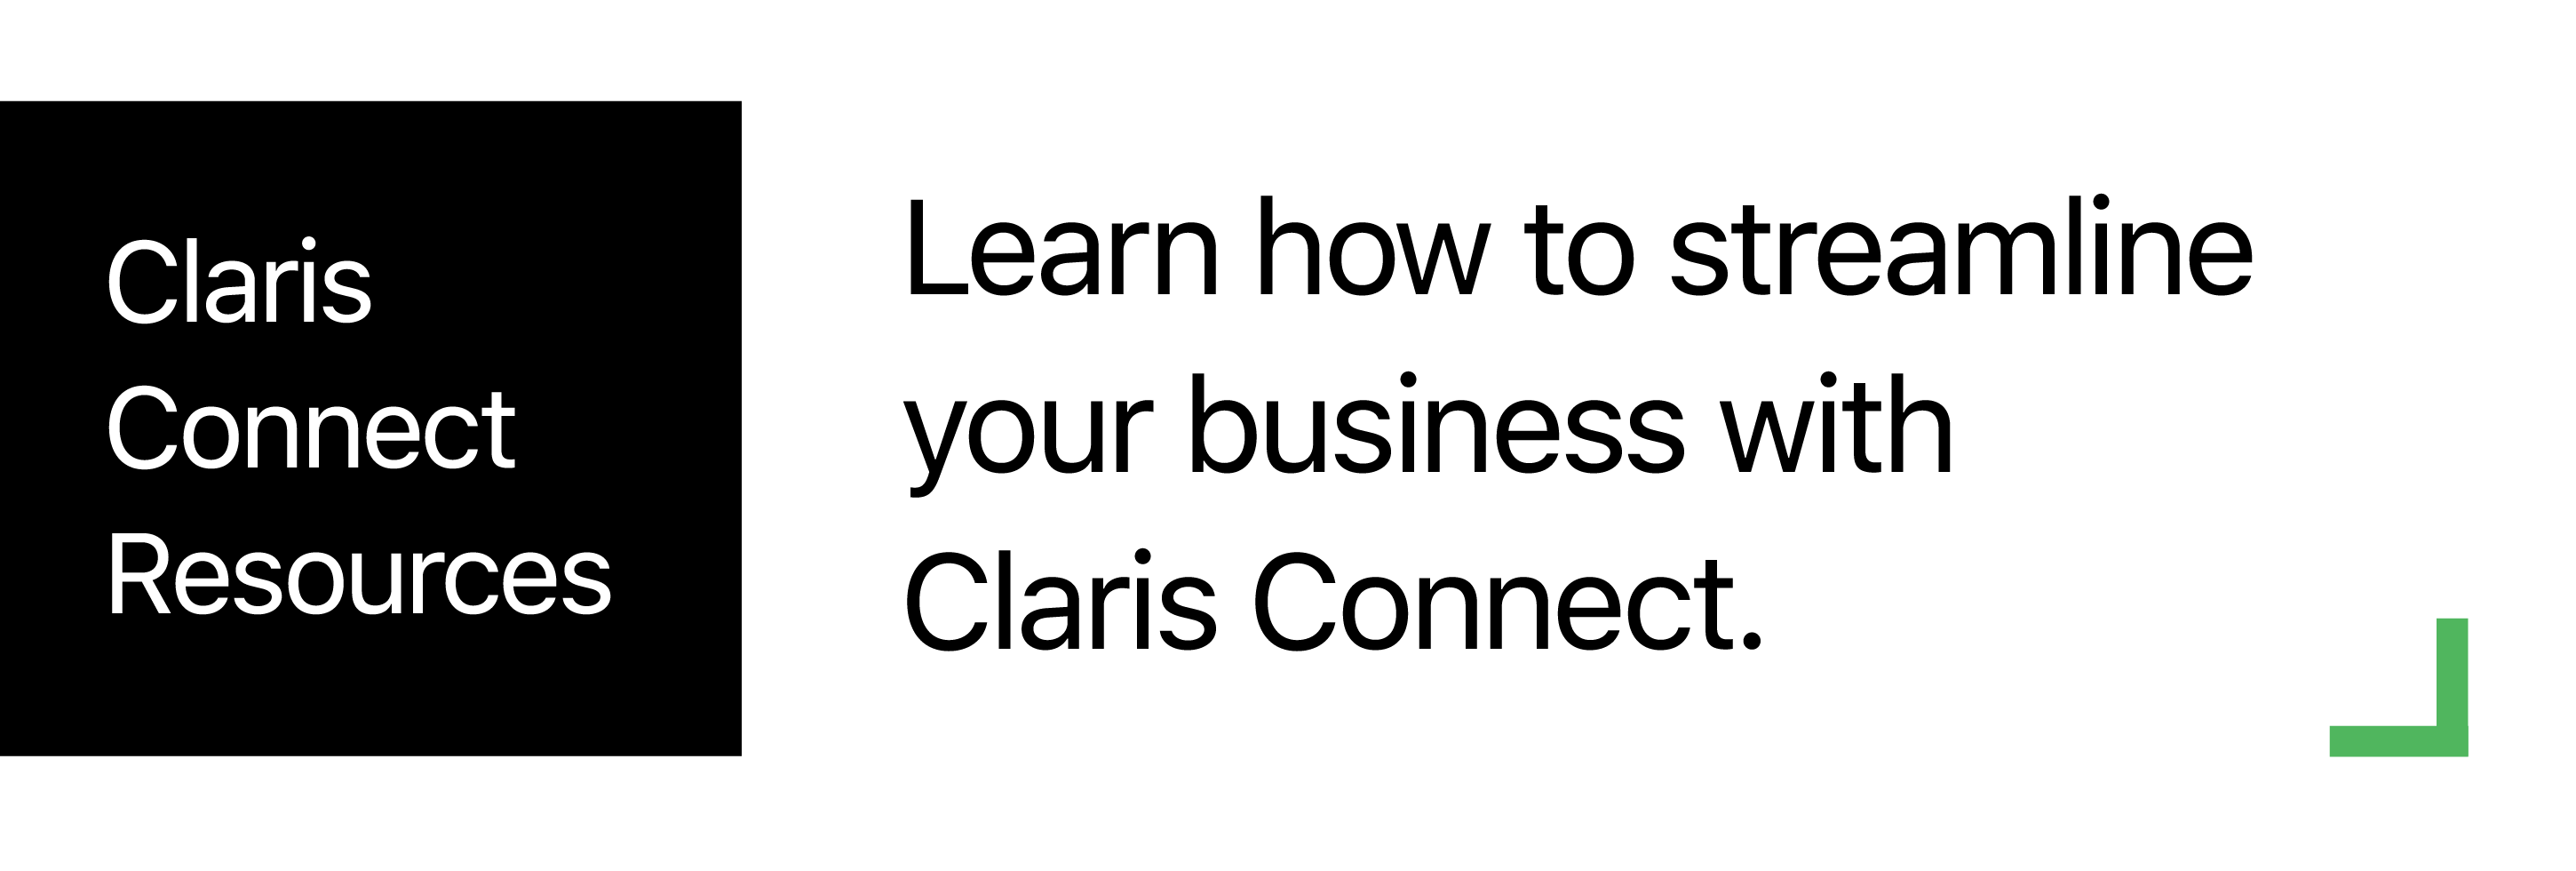 Streamline your business with new Claris Connect.
